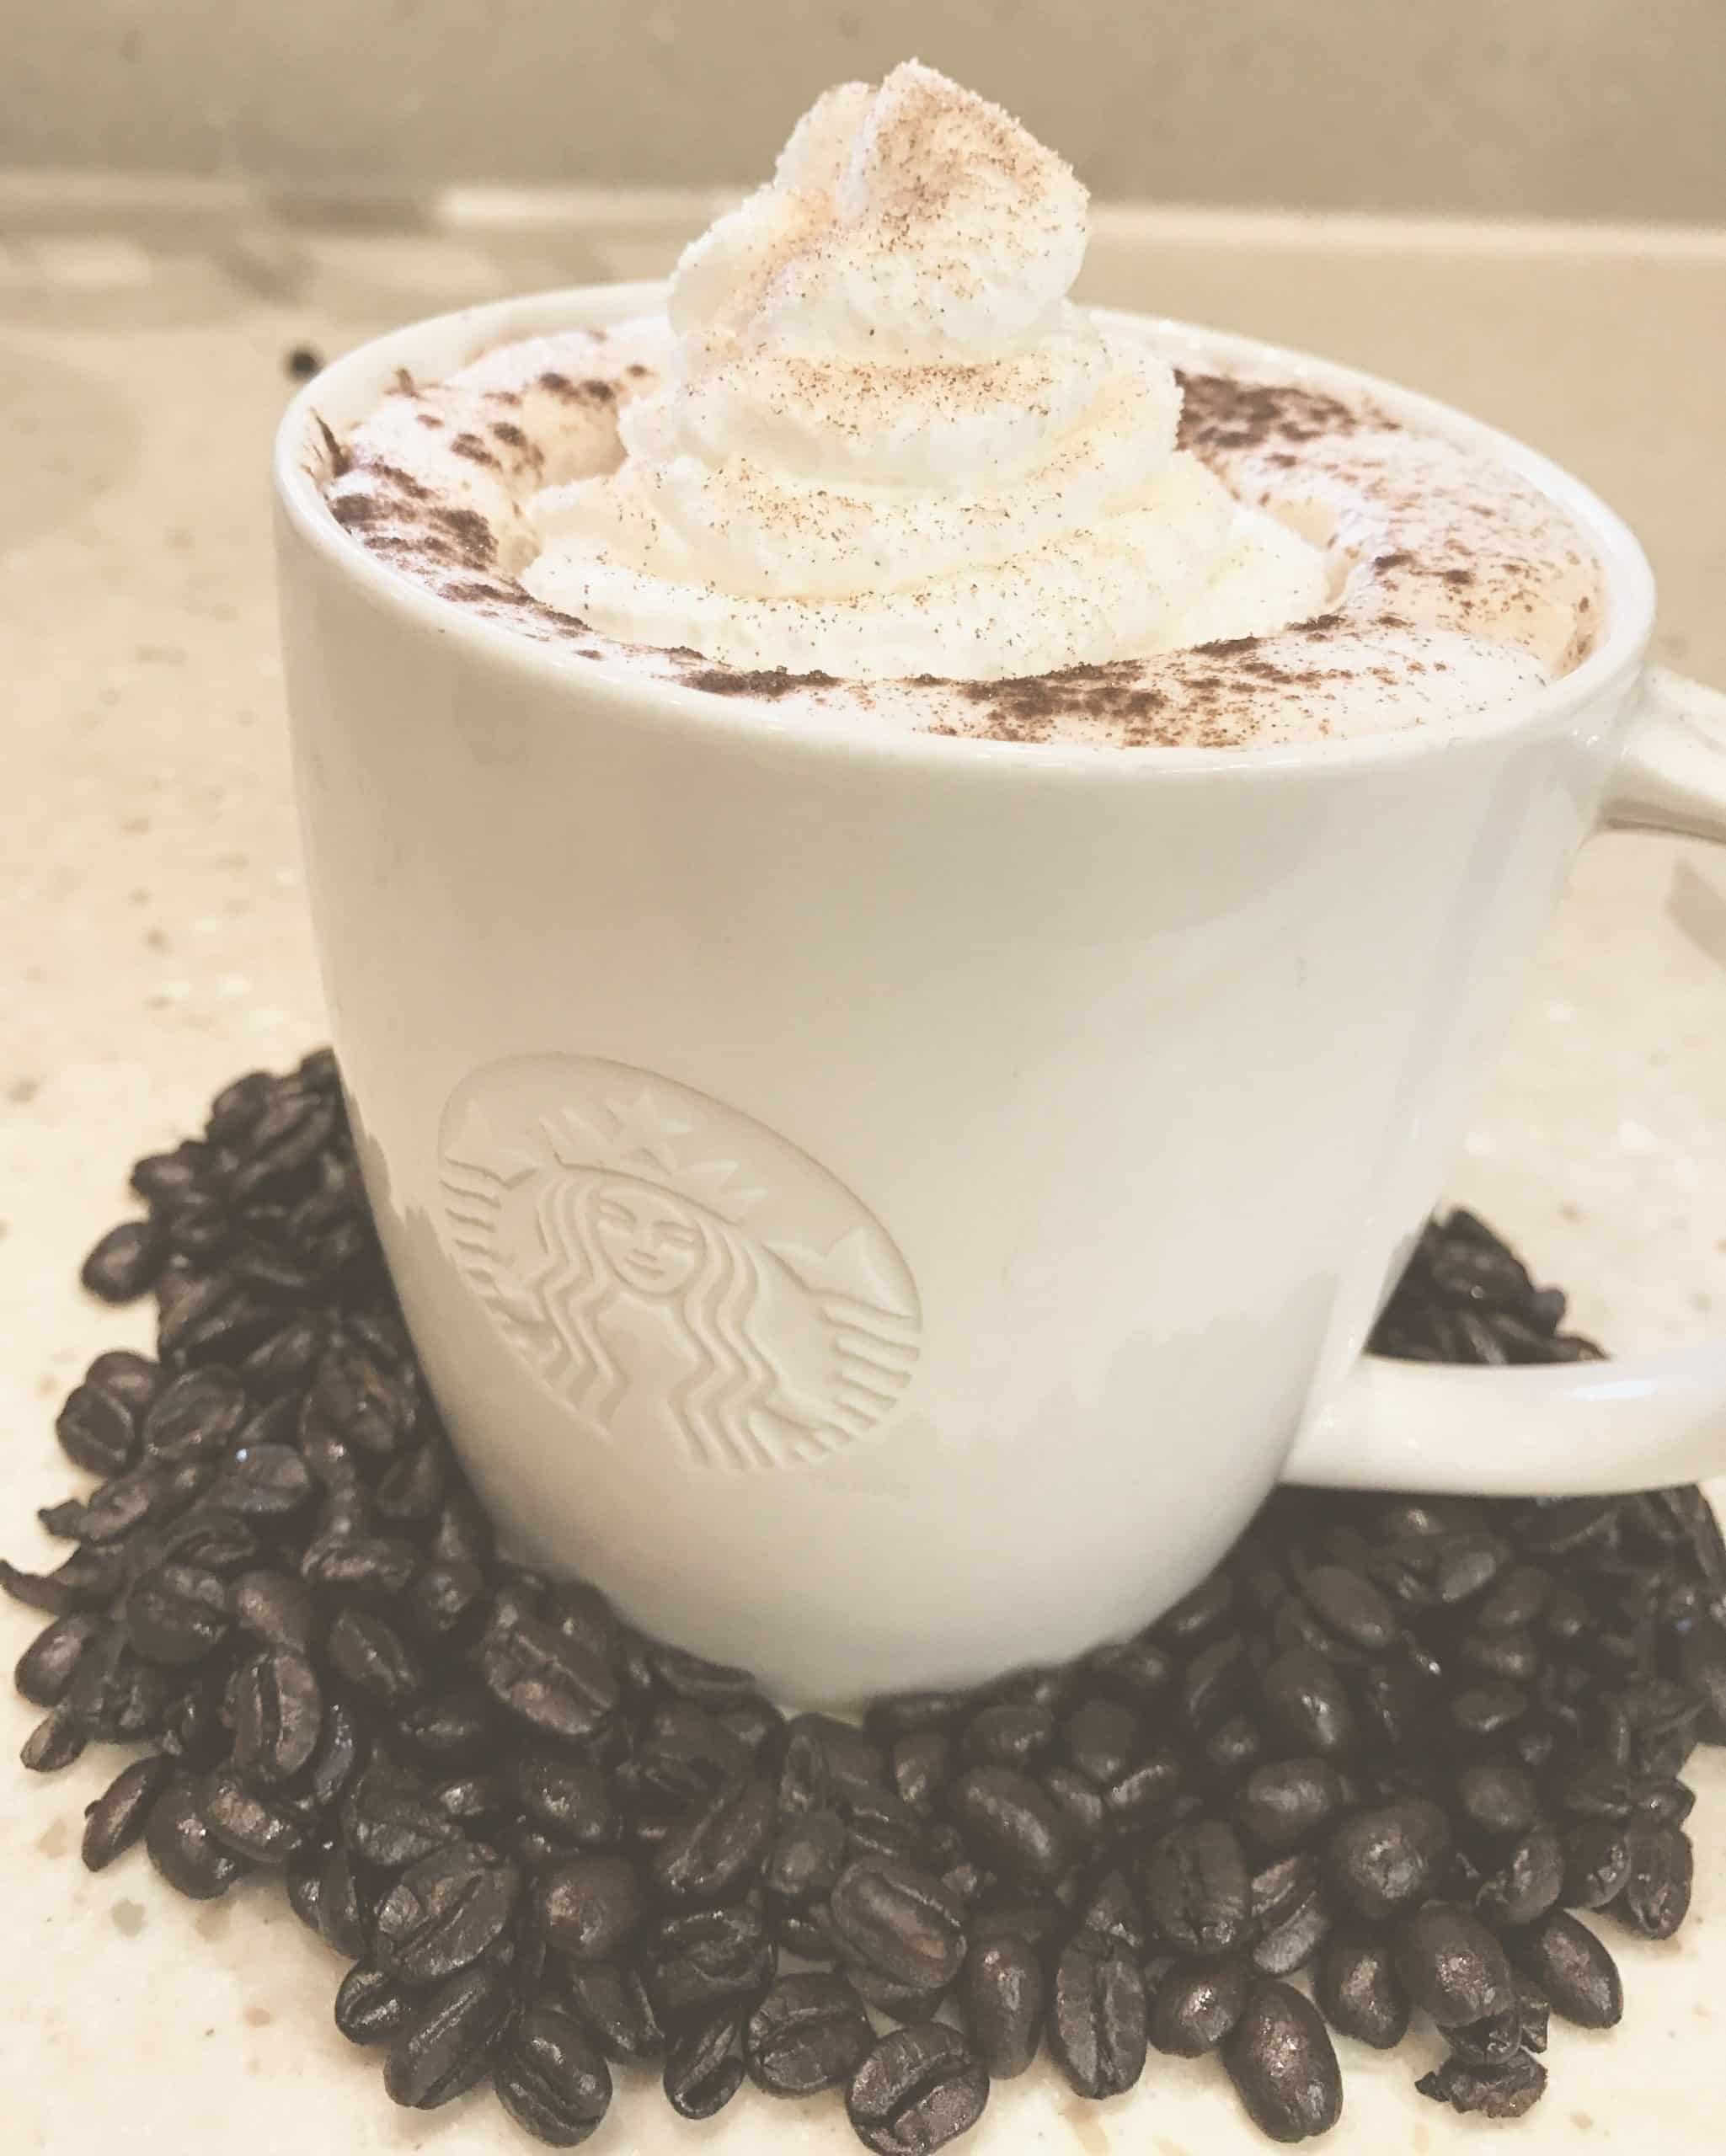 I made a cute cinnamon dolce latte at work : starbucks